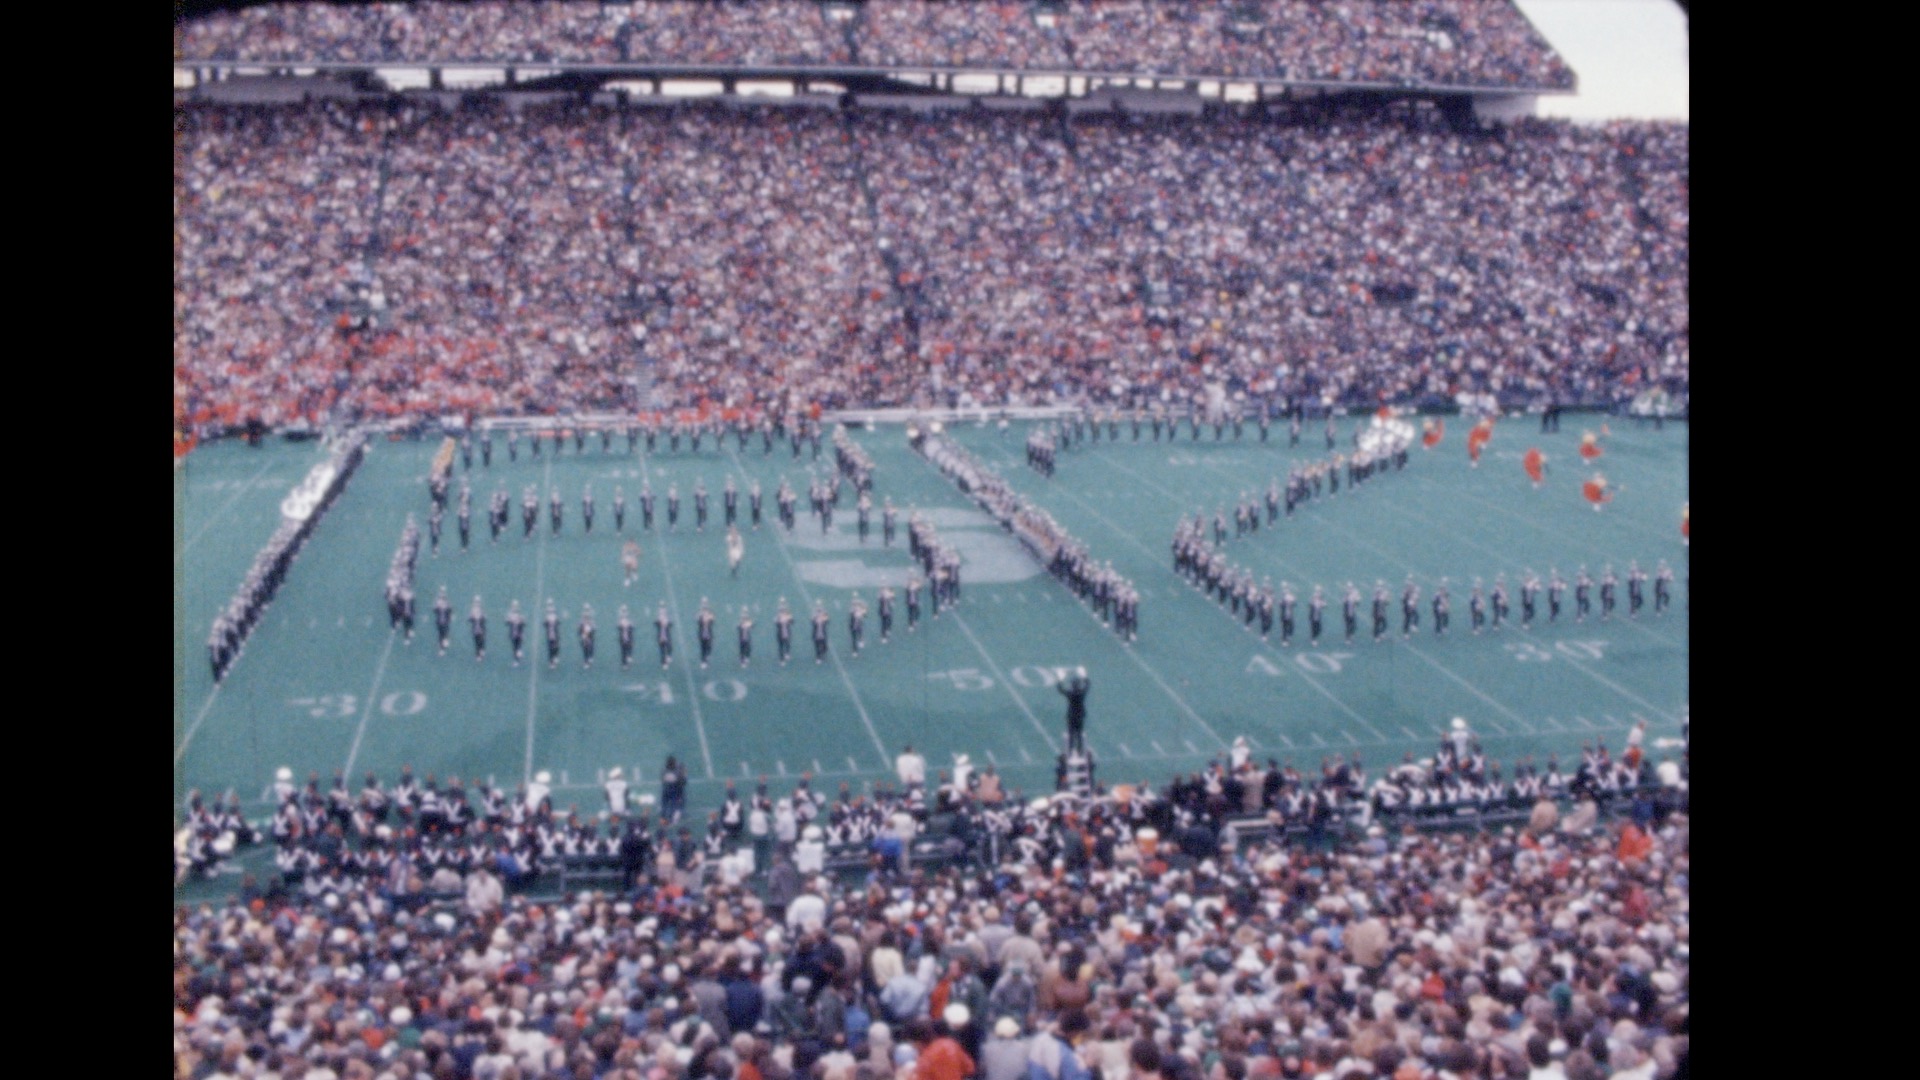 Spartan Marching Band: MSU vs. Ohio State, 1984